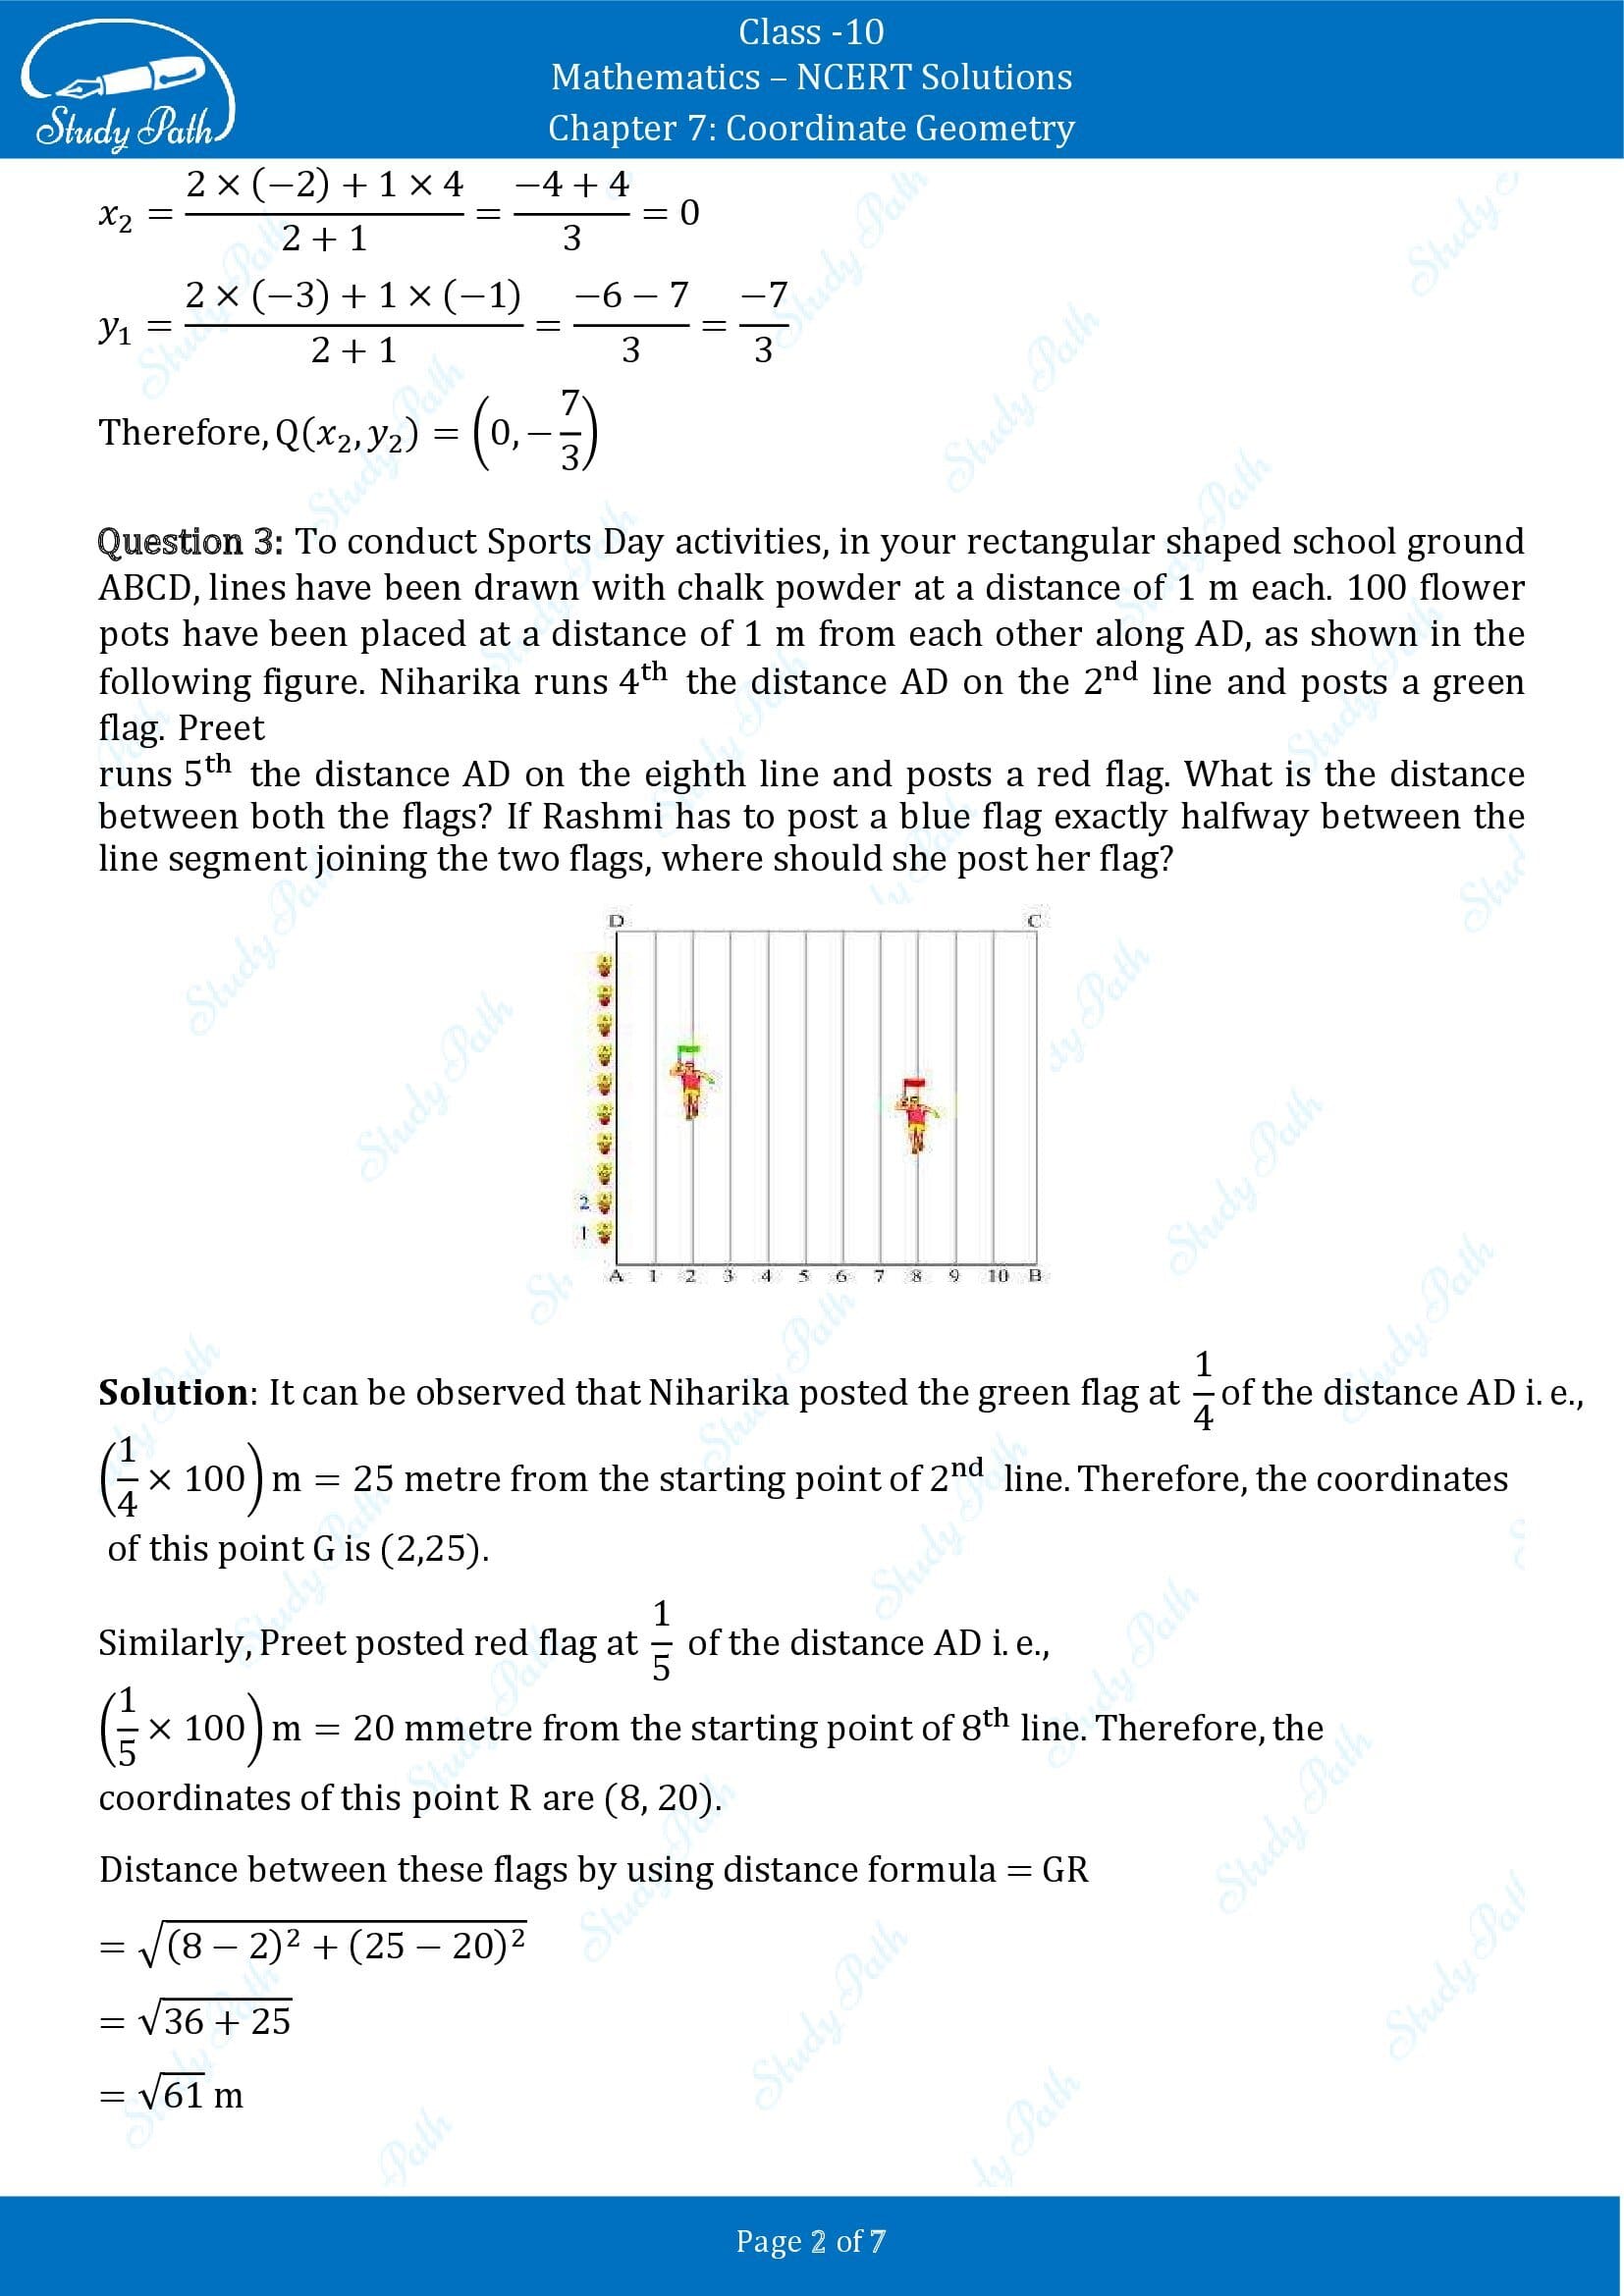 NCERT Solutions for Class 10 Maths Chapter 7 Coordinate Geometry Exercise 7.2 00002